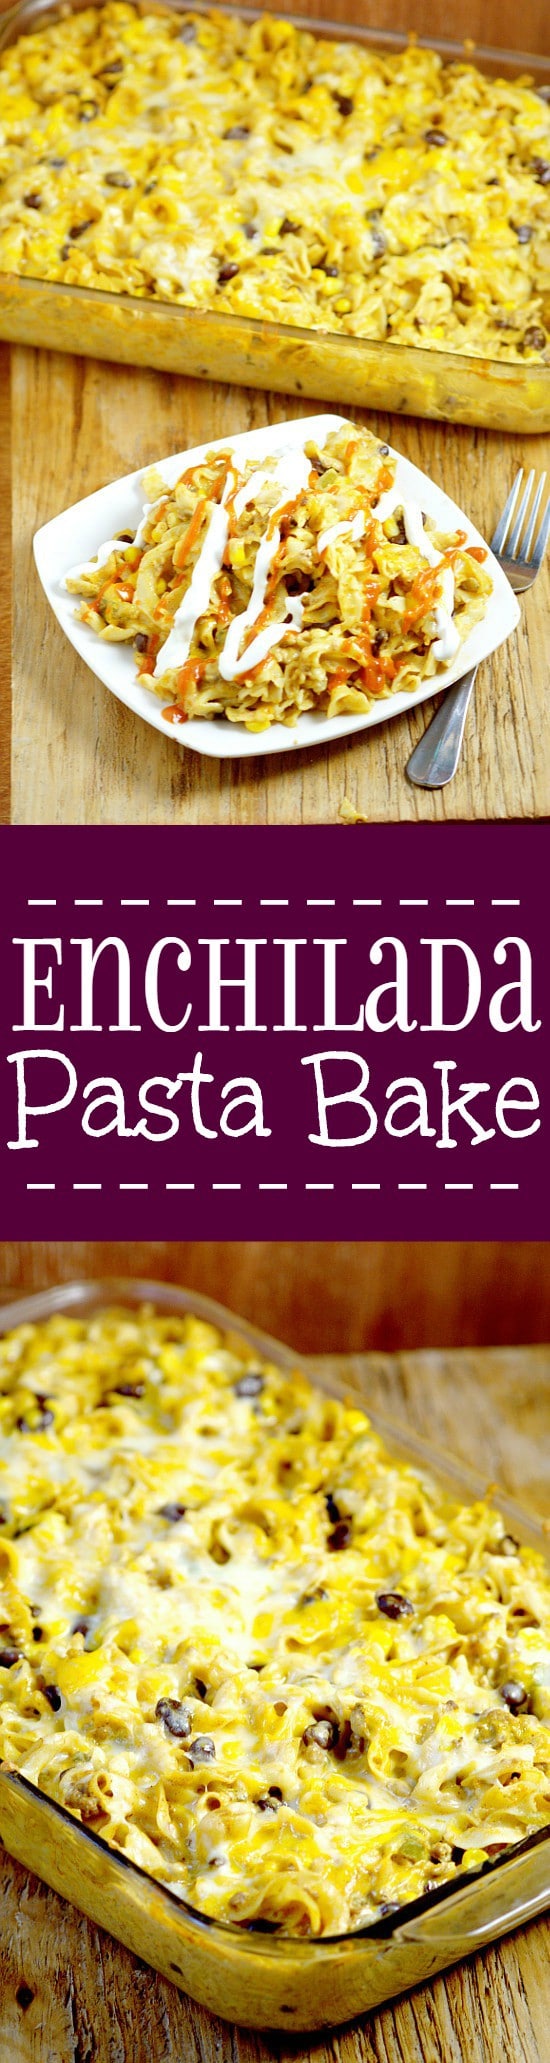 Enchilada Pasta Bake recipe is a delicious way to use up leftover taco meat and great for family dinner.  Noodles tossed with a creamy, cheesy, and slightly spicy sauce mixed with taco-seasoned ground beef, corn, and black beans. Perfect easy pasta recipe for family night!